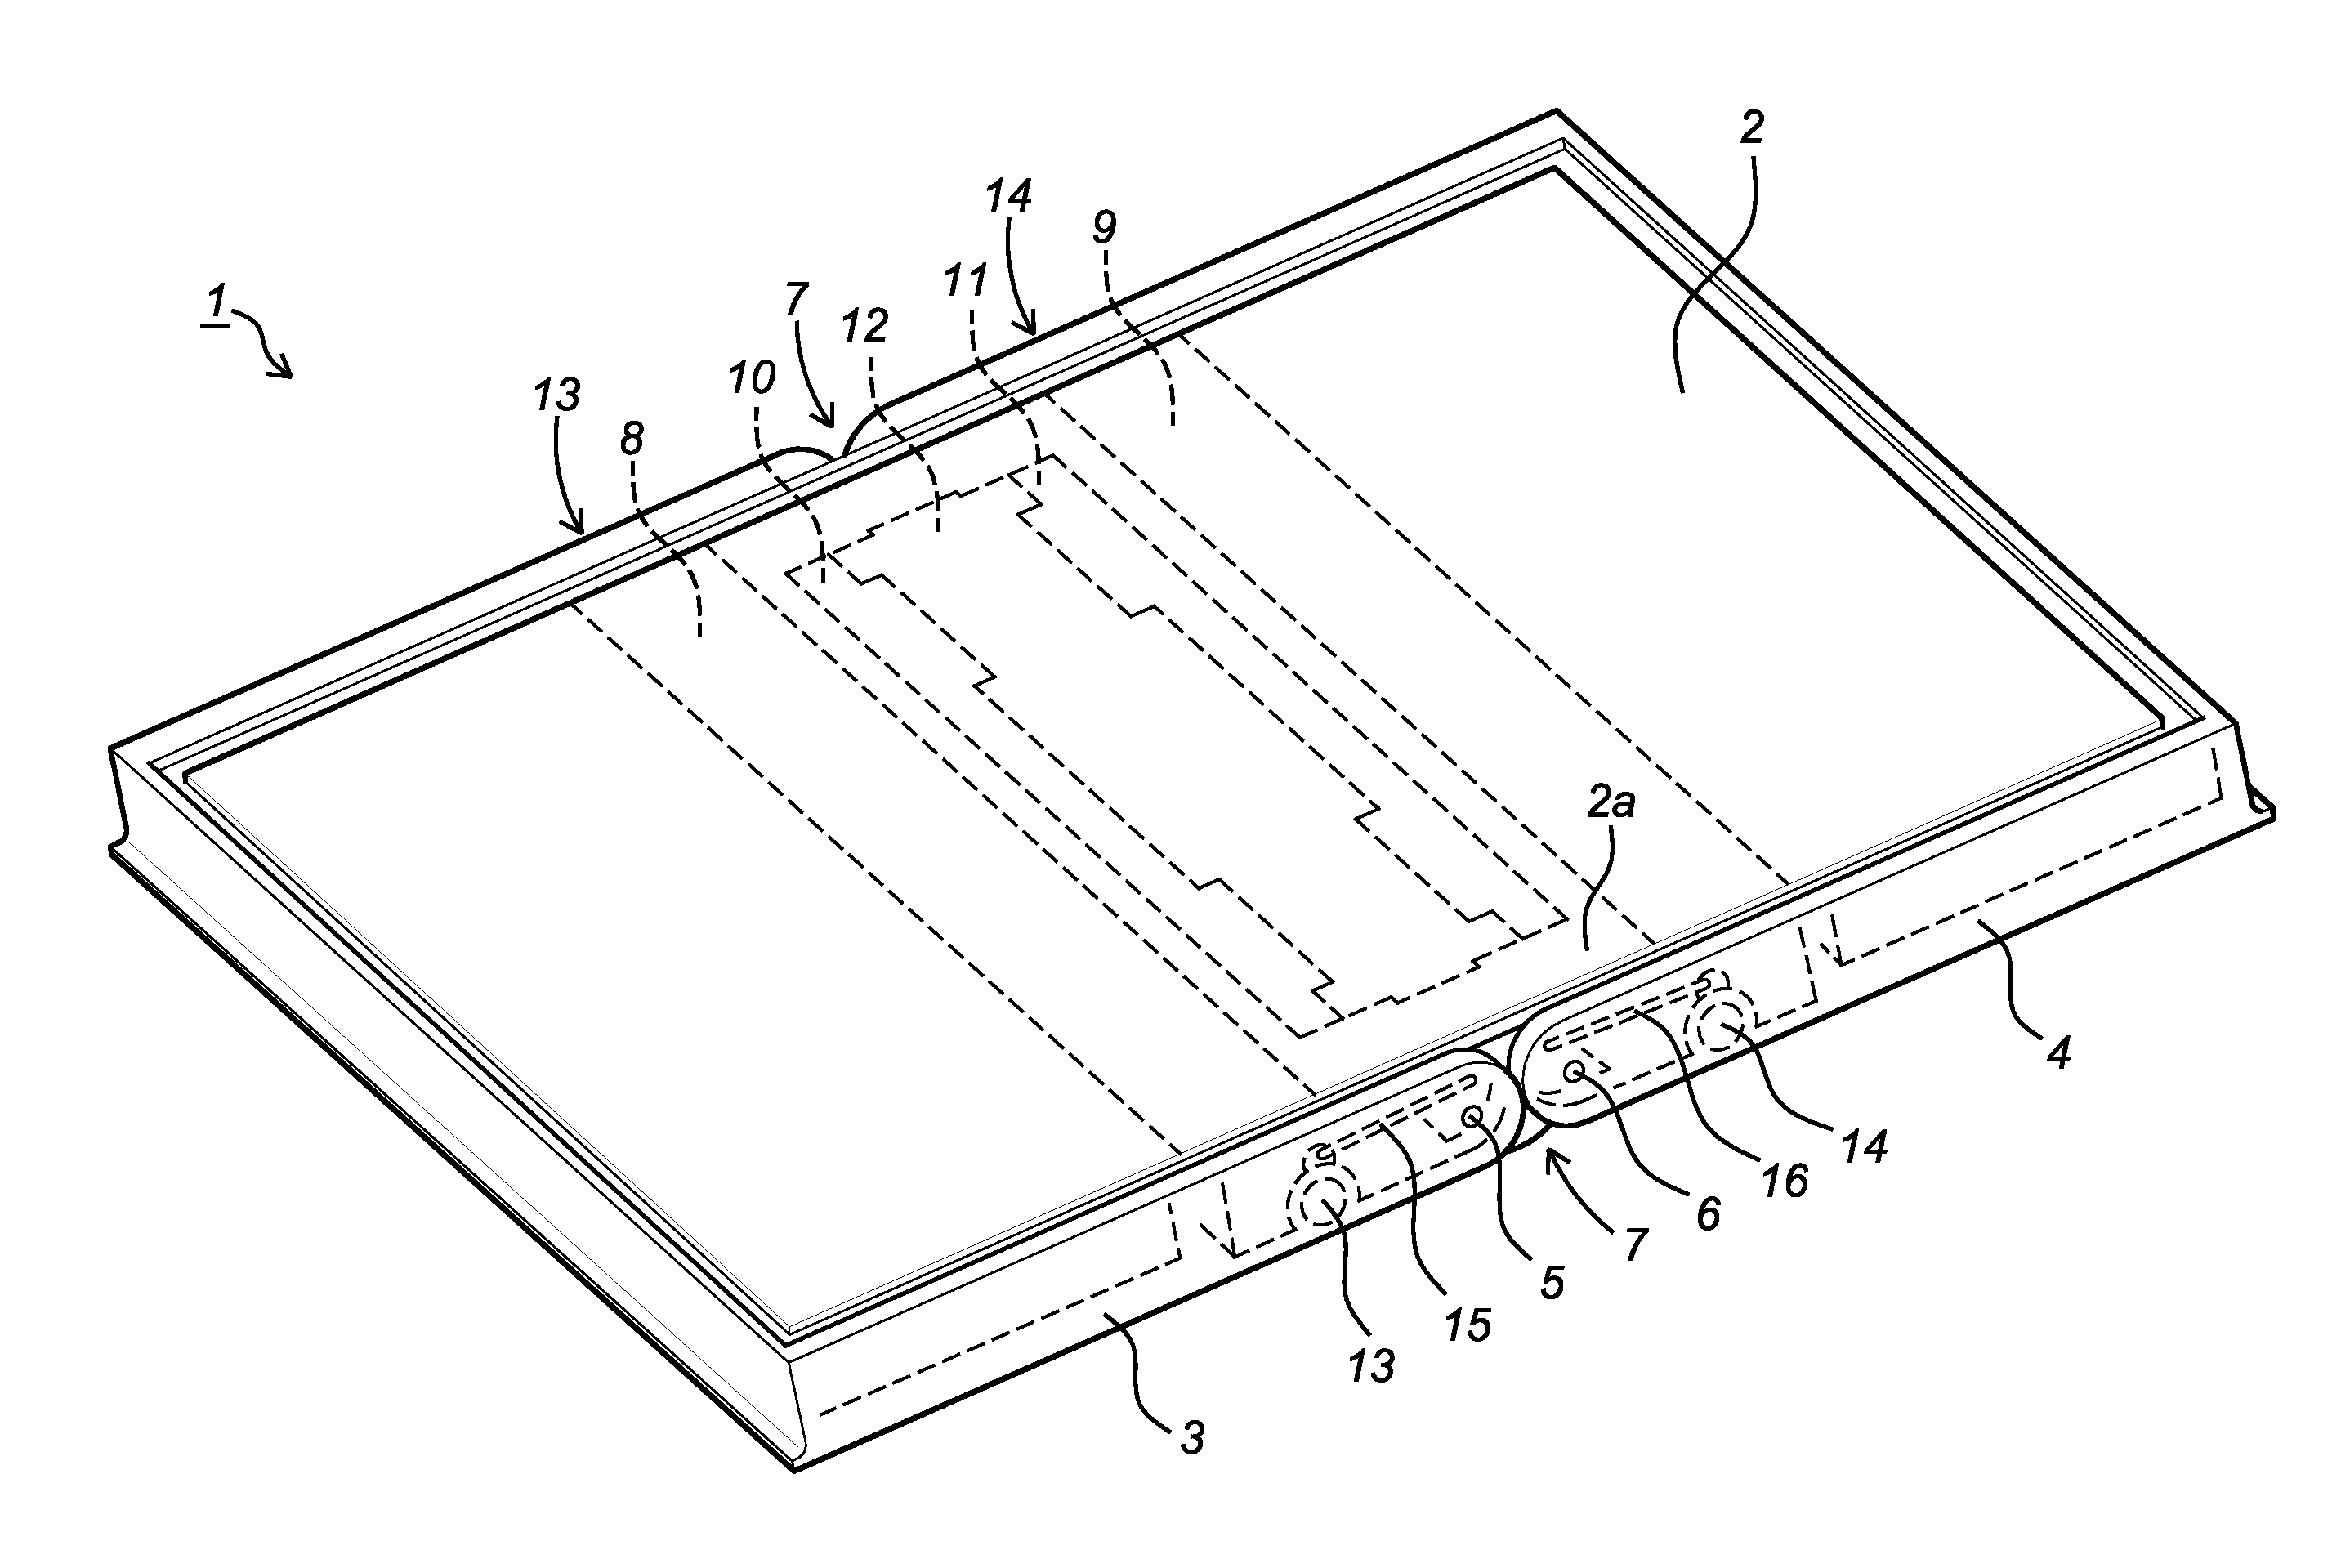 Display system with a flexible display